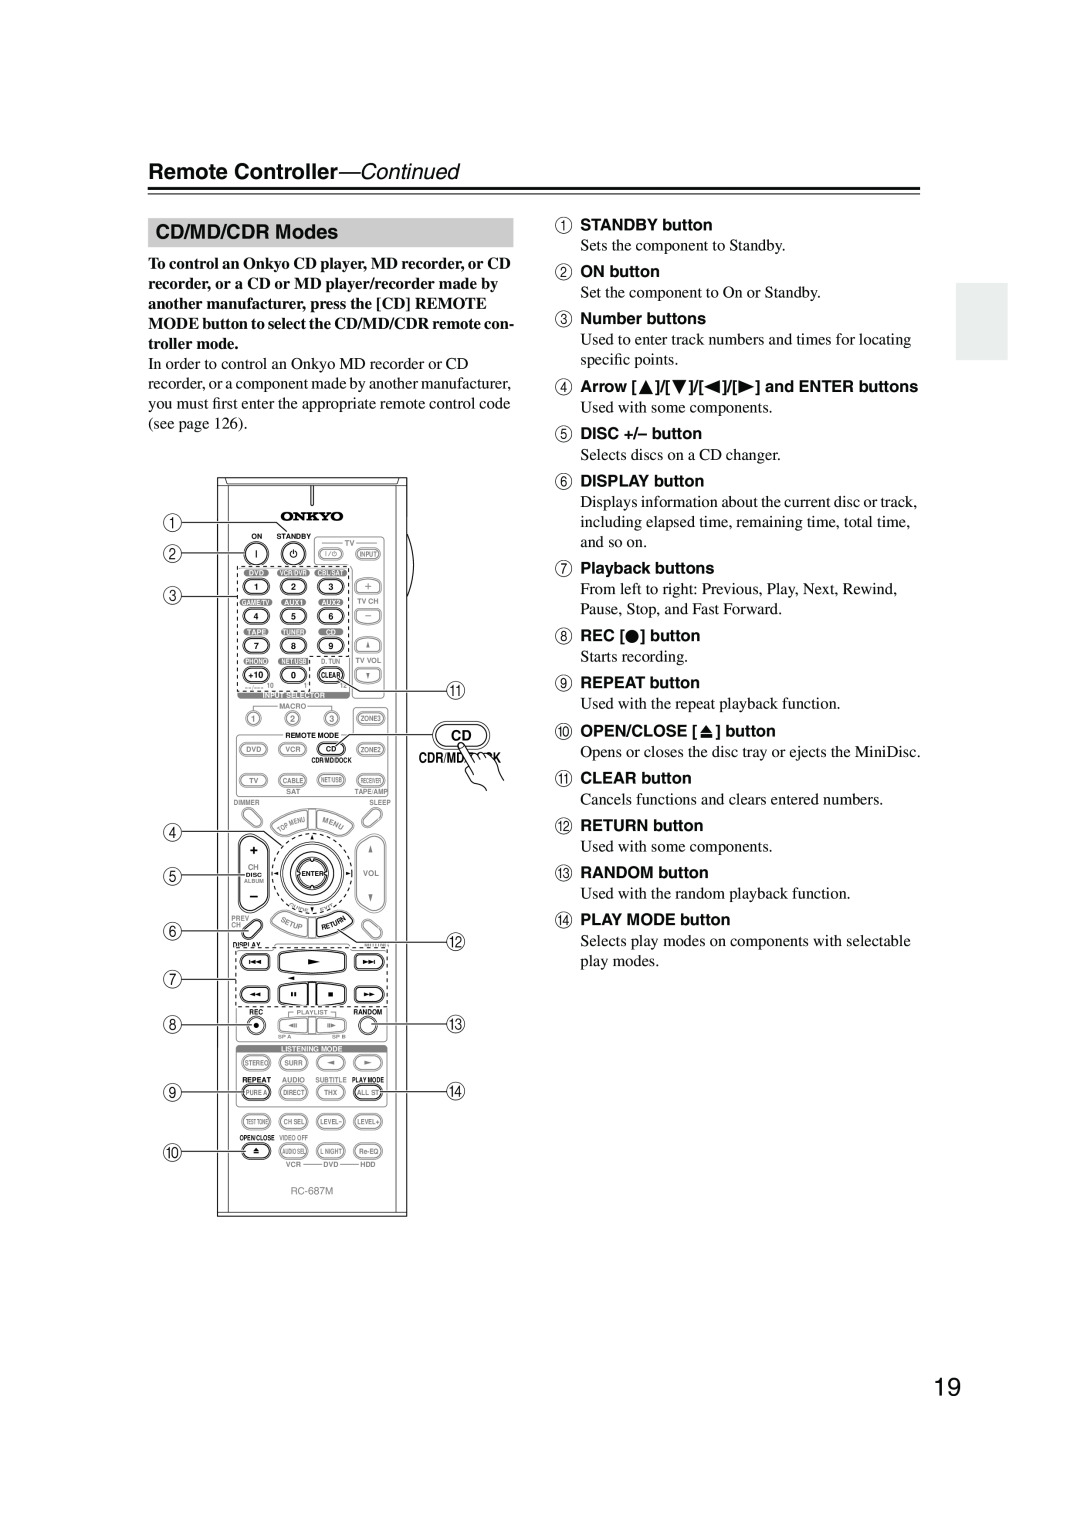 Onkyo TX-NR905 instruction manual CD/MD/CDR Modes, Remote Controller—Continued 